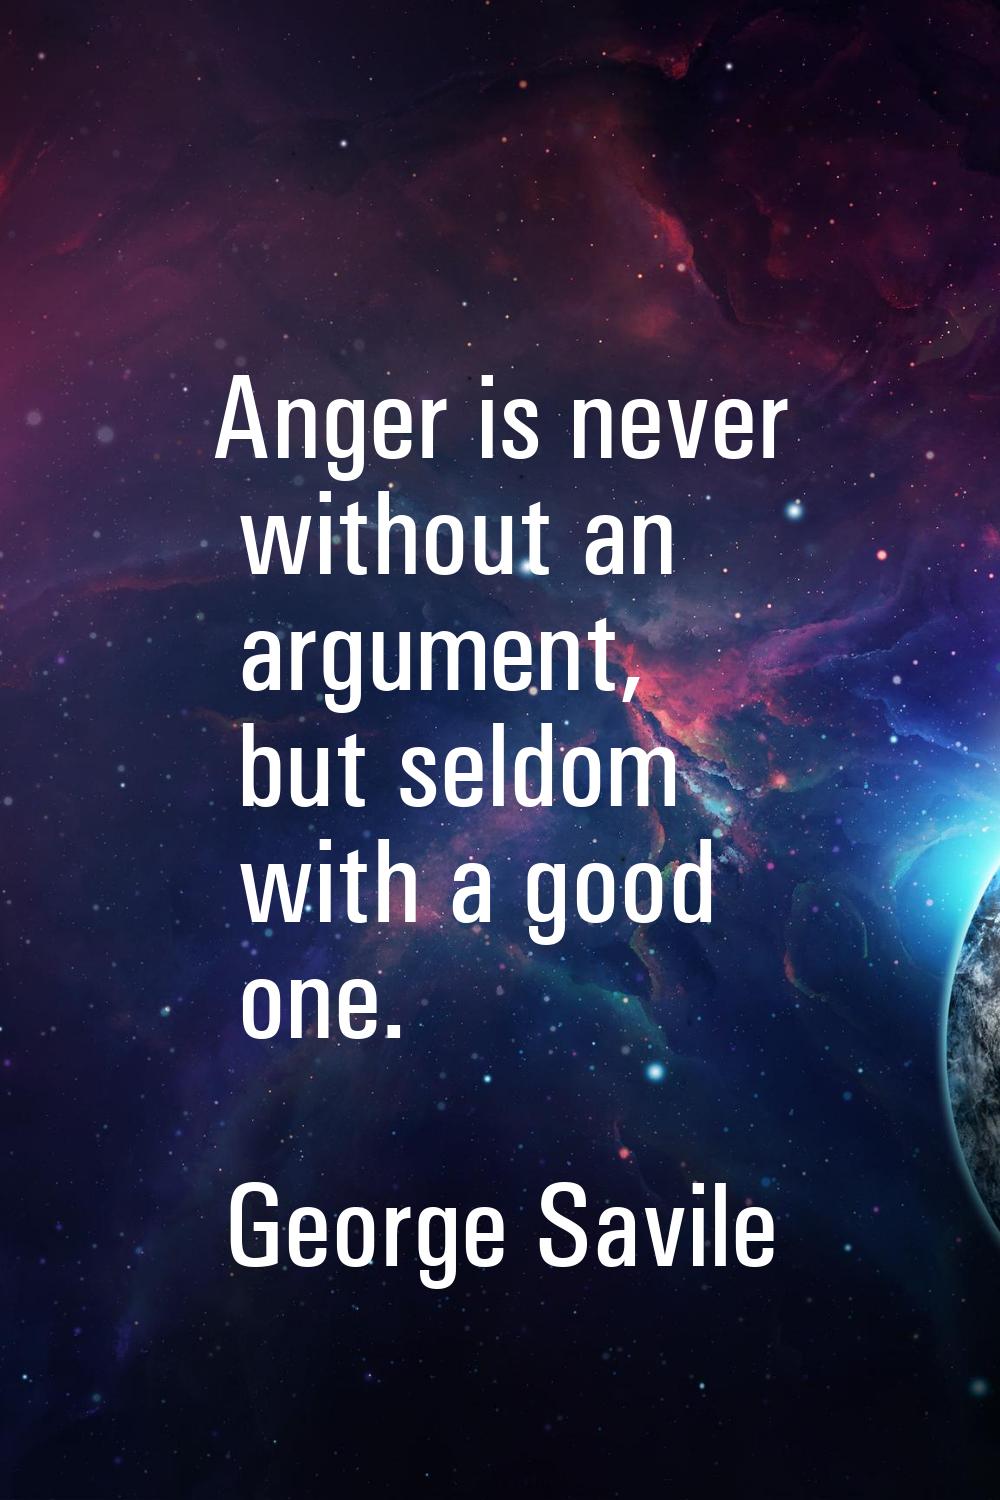 Anger is never without an argument, but seldom with a good one.